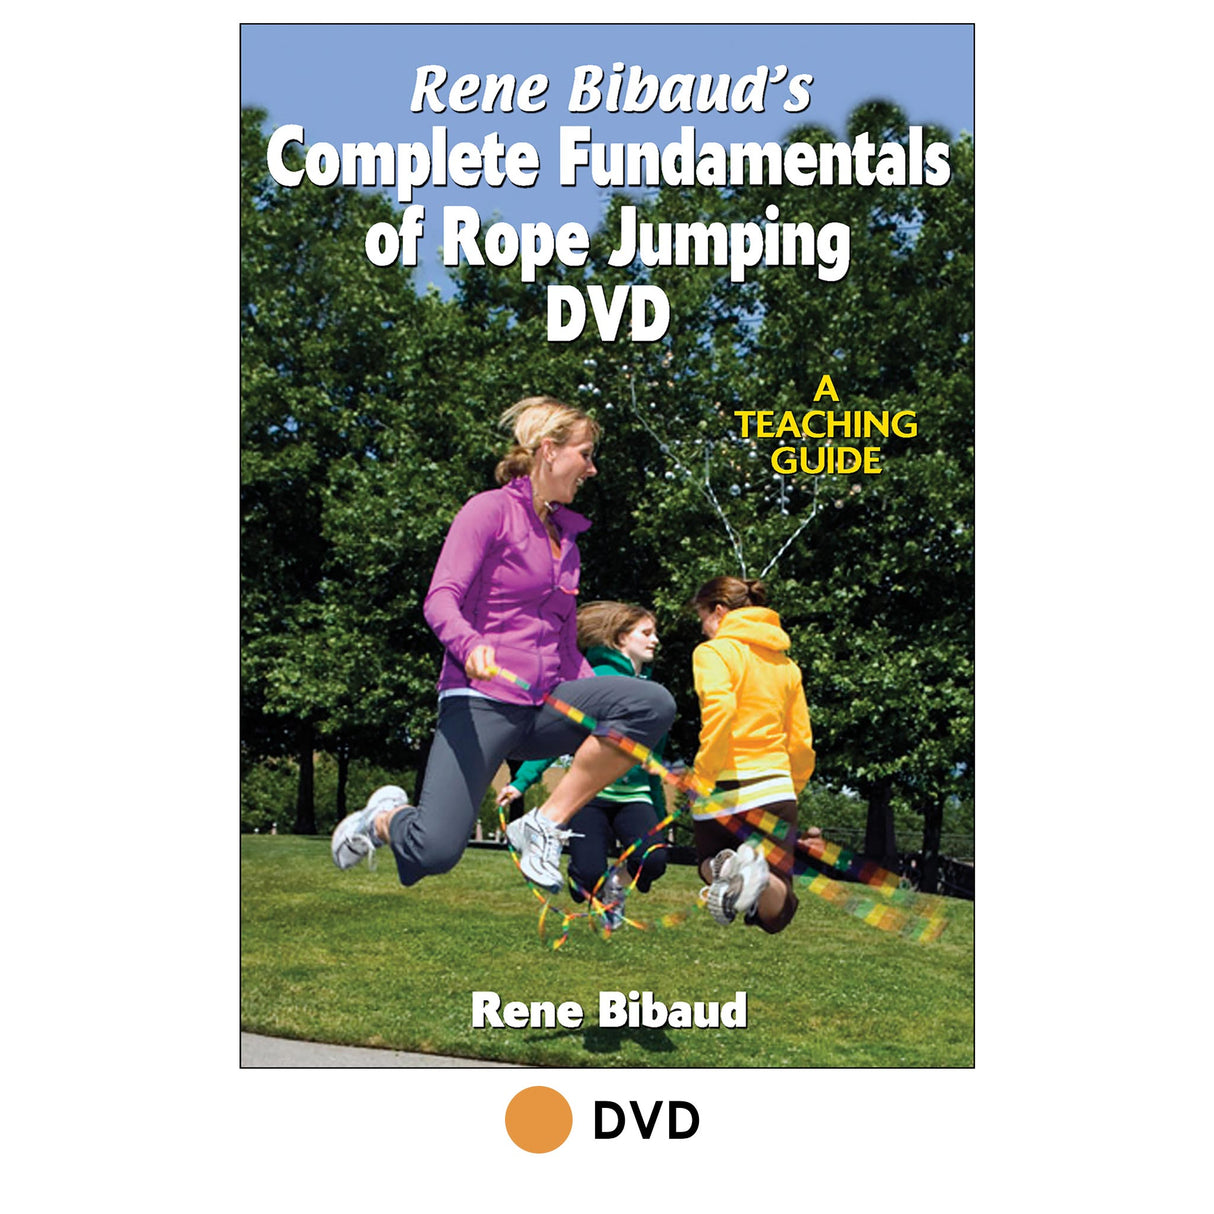 Rene Bibaud's Complete Fundamentals of Rope Jumping DVD:Teach